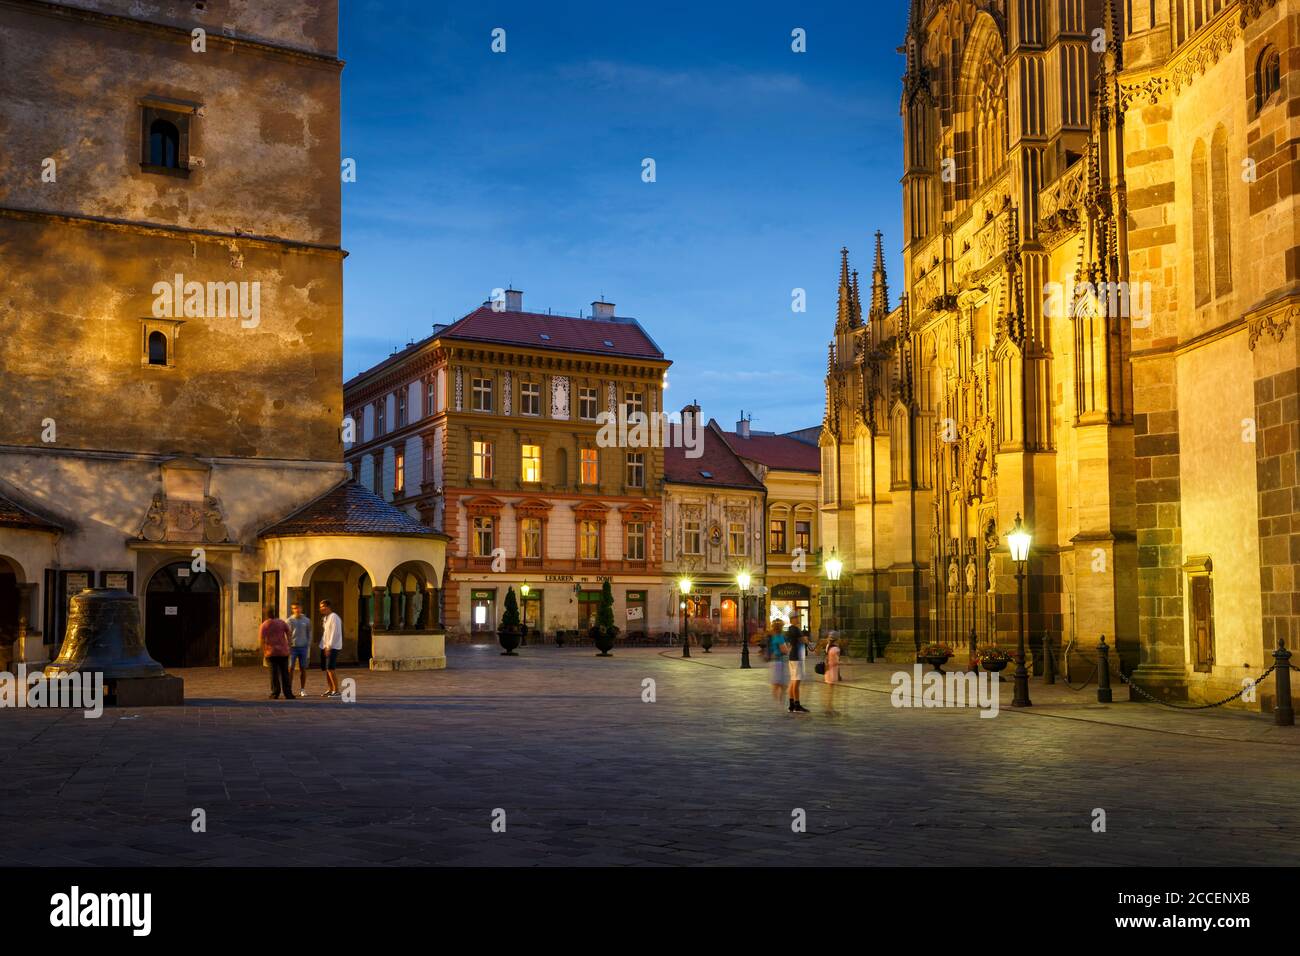 Kosice, Slovakia - August 11, 2018: Urban's Tower and St. Elisabeth cathedral in the main square of Kosice city in eastern Slovakia. Stock Photo